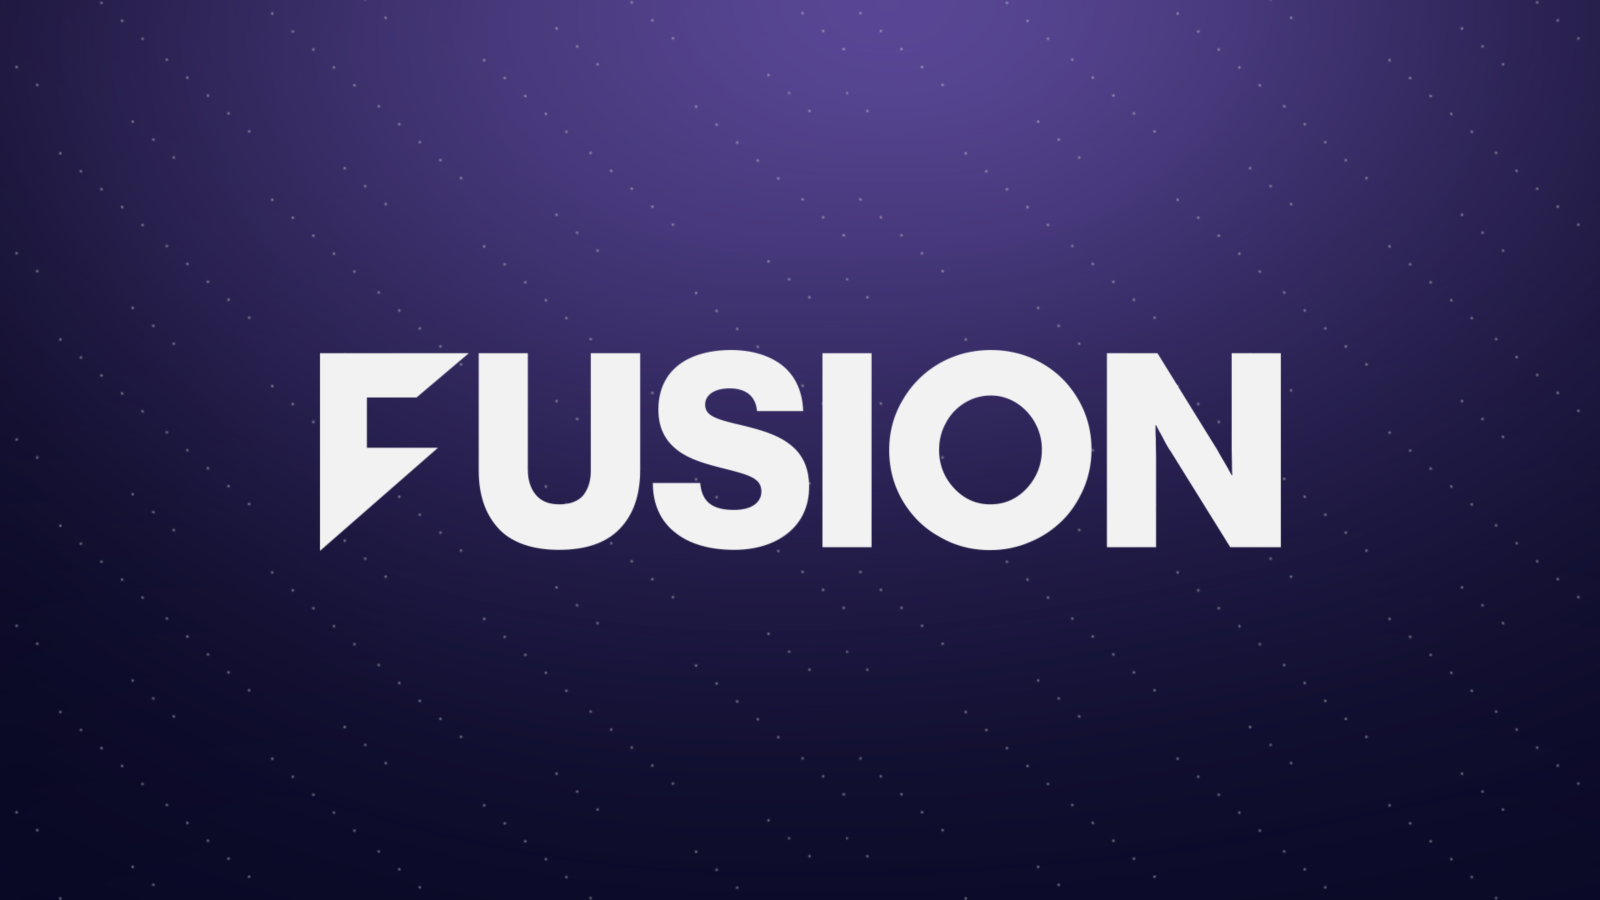 How to Watch Fusion TV Without Cable - Have Some Fun!